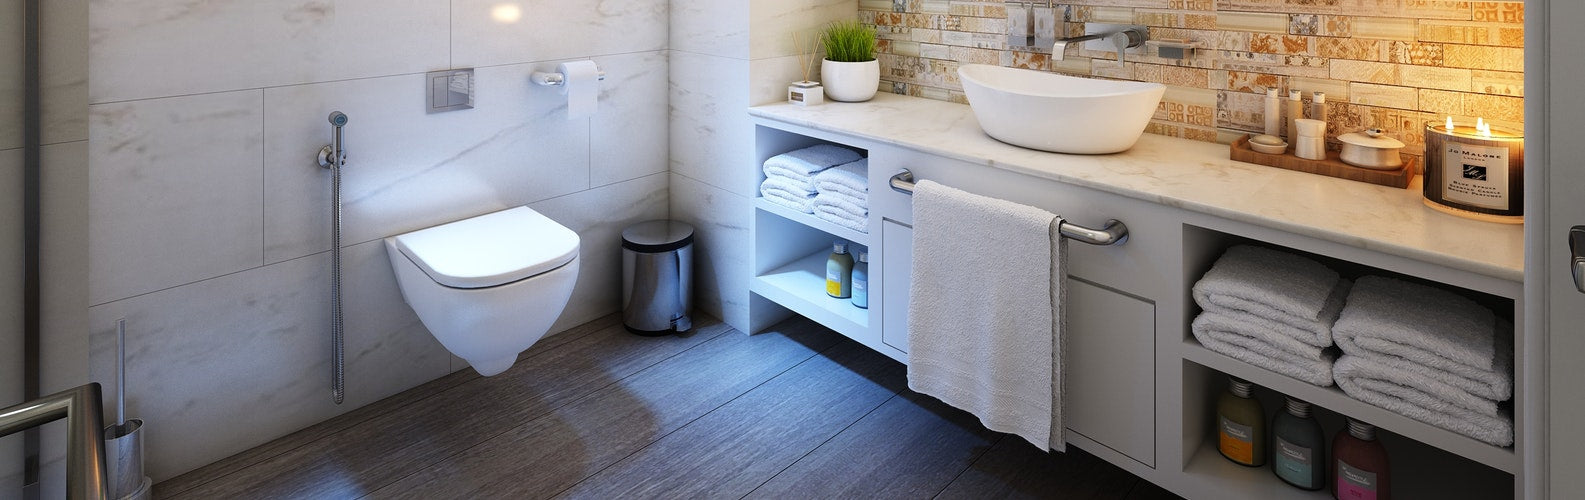 Buying a Modern Rimless Toilet Are They Worth It?